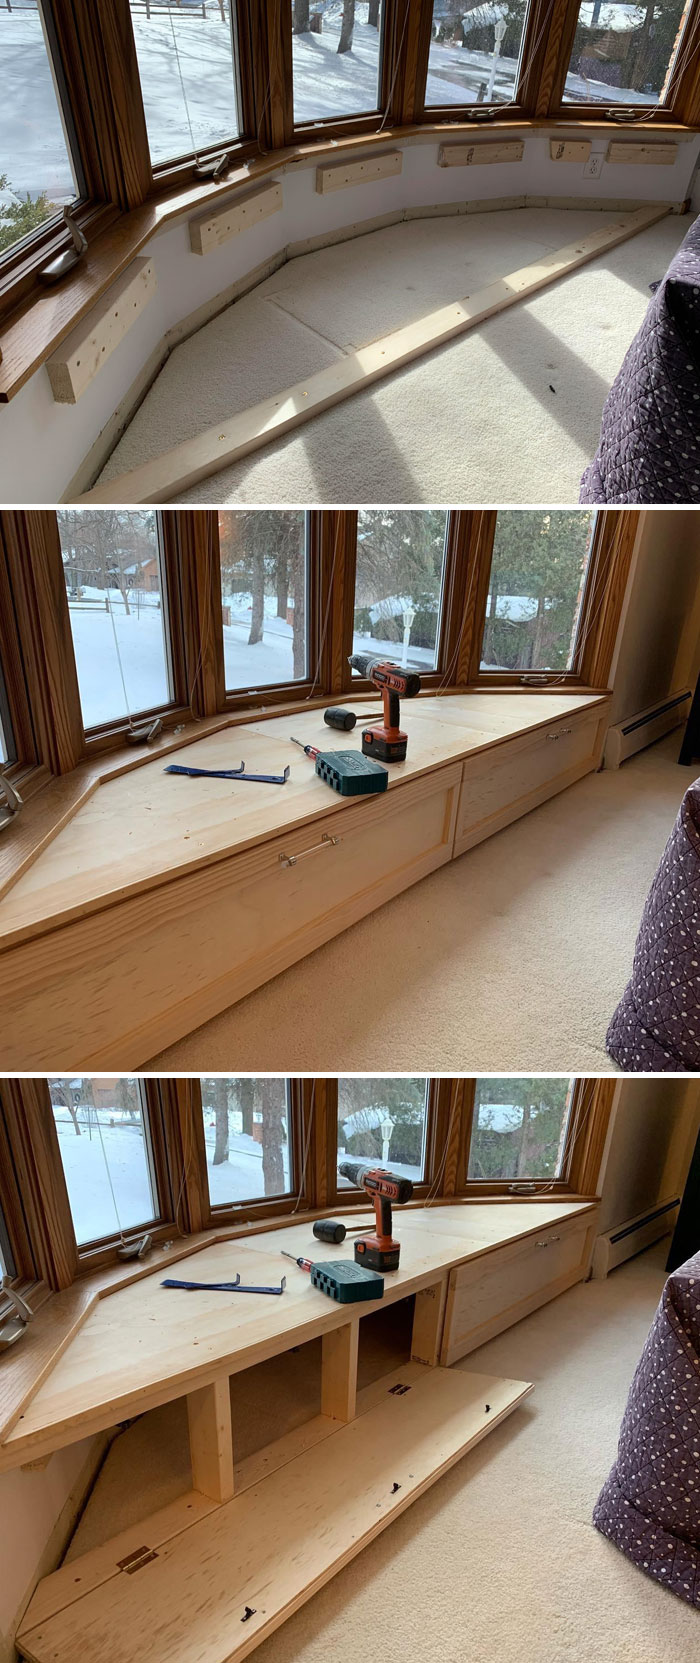 My Wife Wanted A Bench For Our Bay Window So I Gave It A Go. Not Much Of A Woodworker But I Came Out Alright!